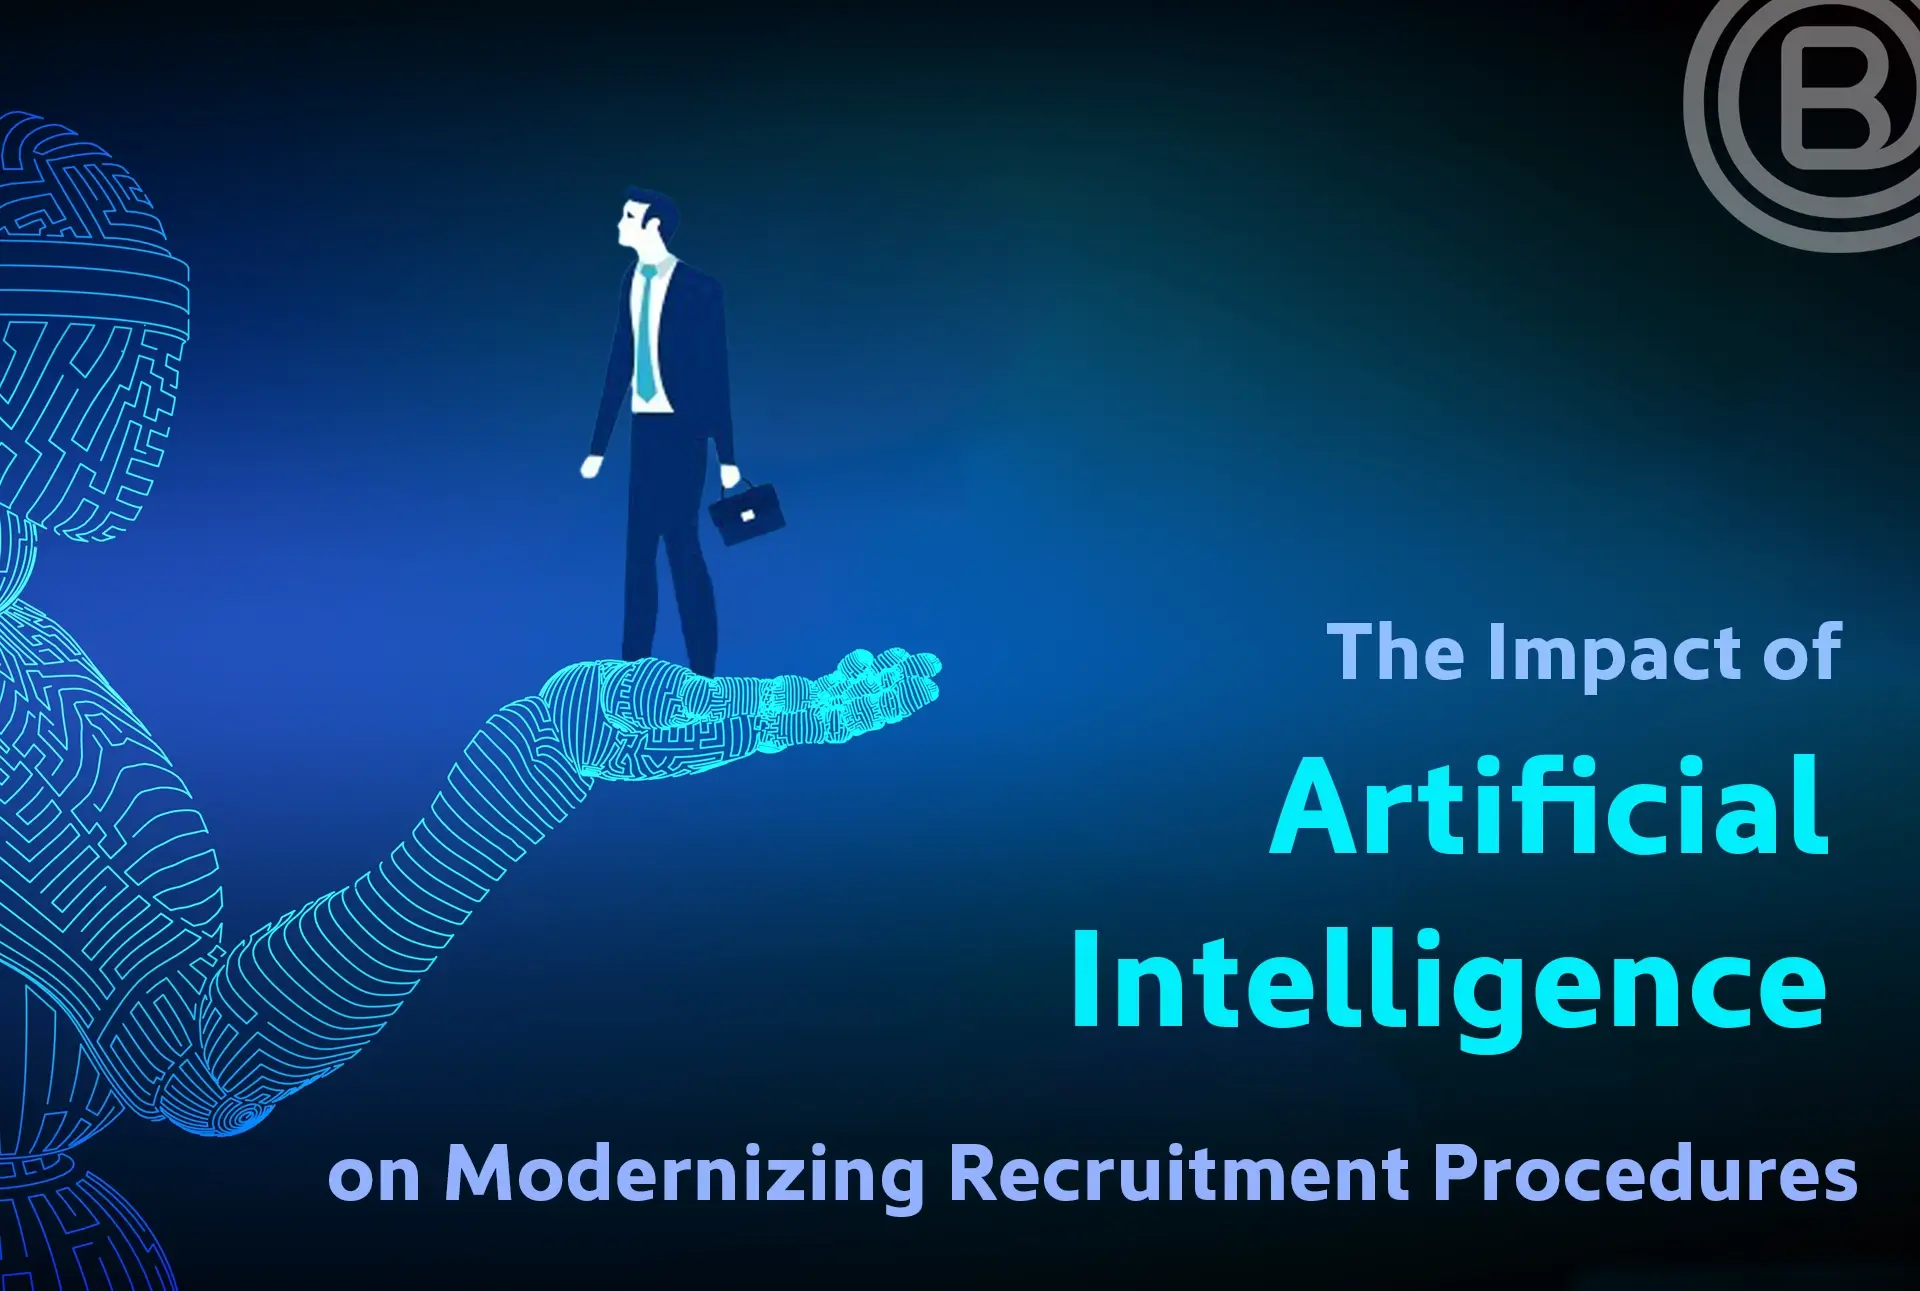 The Impact of Artificial Intelligence on Modernizing Recruitment Procedures